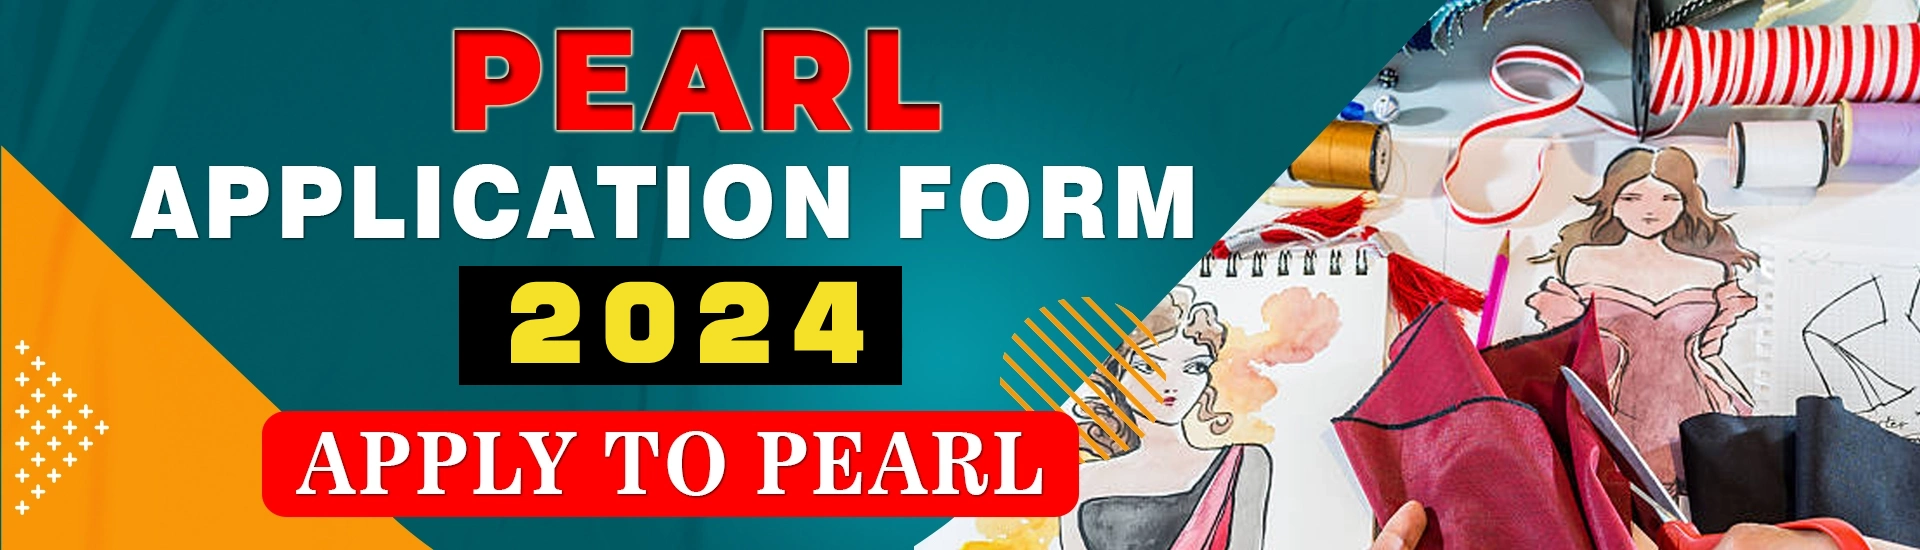 PEARL APPLICATION FORM 2024